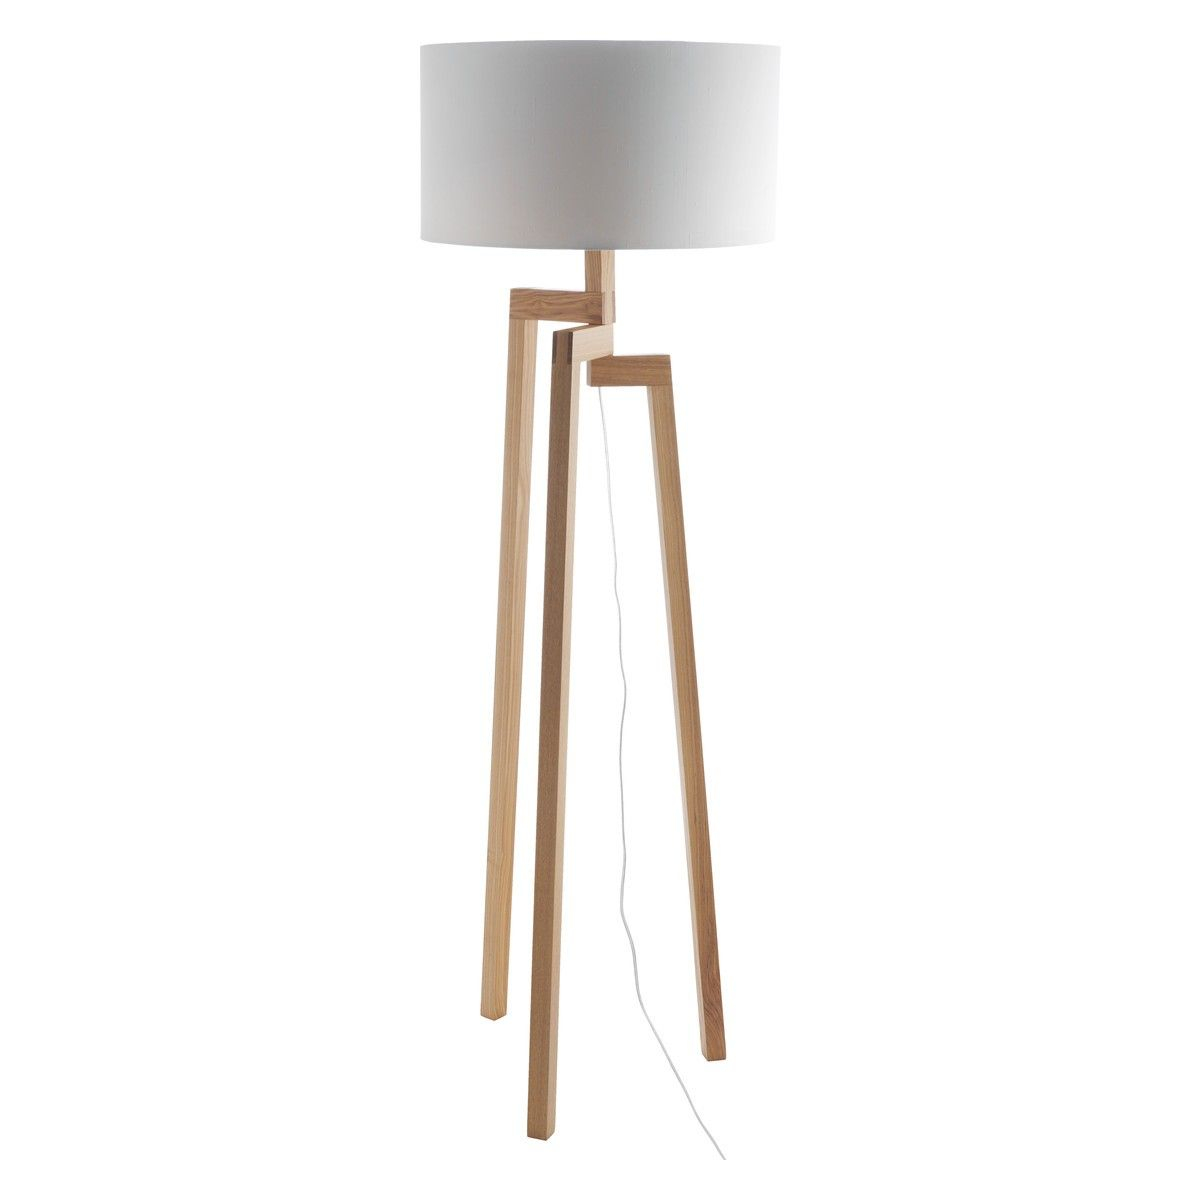 Dylan Base Ash Wooden Floor Lamp In 2019 Wooden Floor intended for dimensions 1200 X 1200